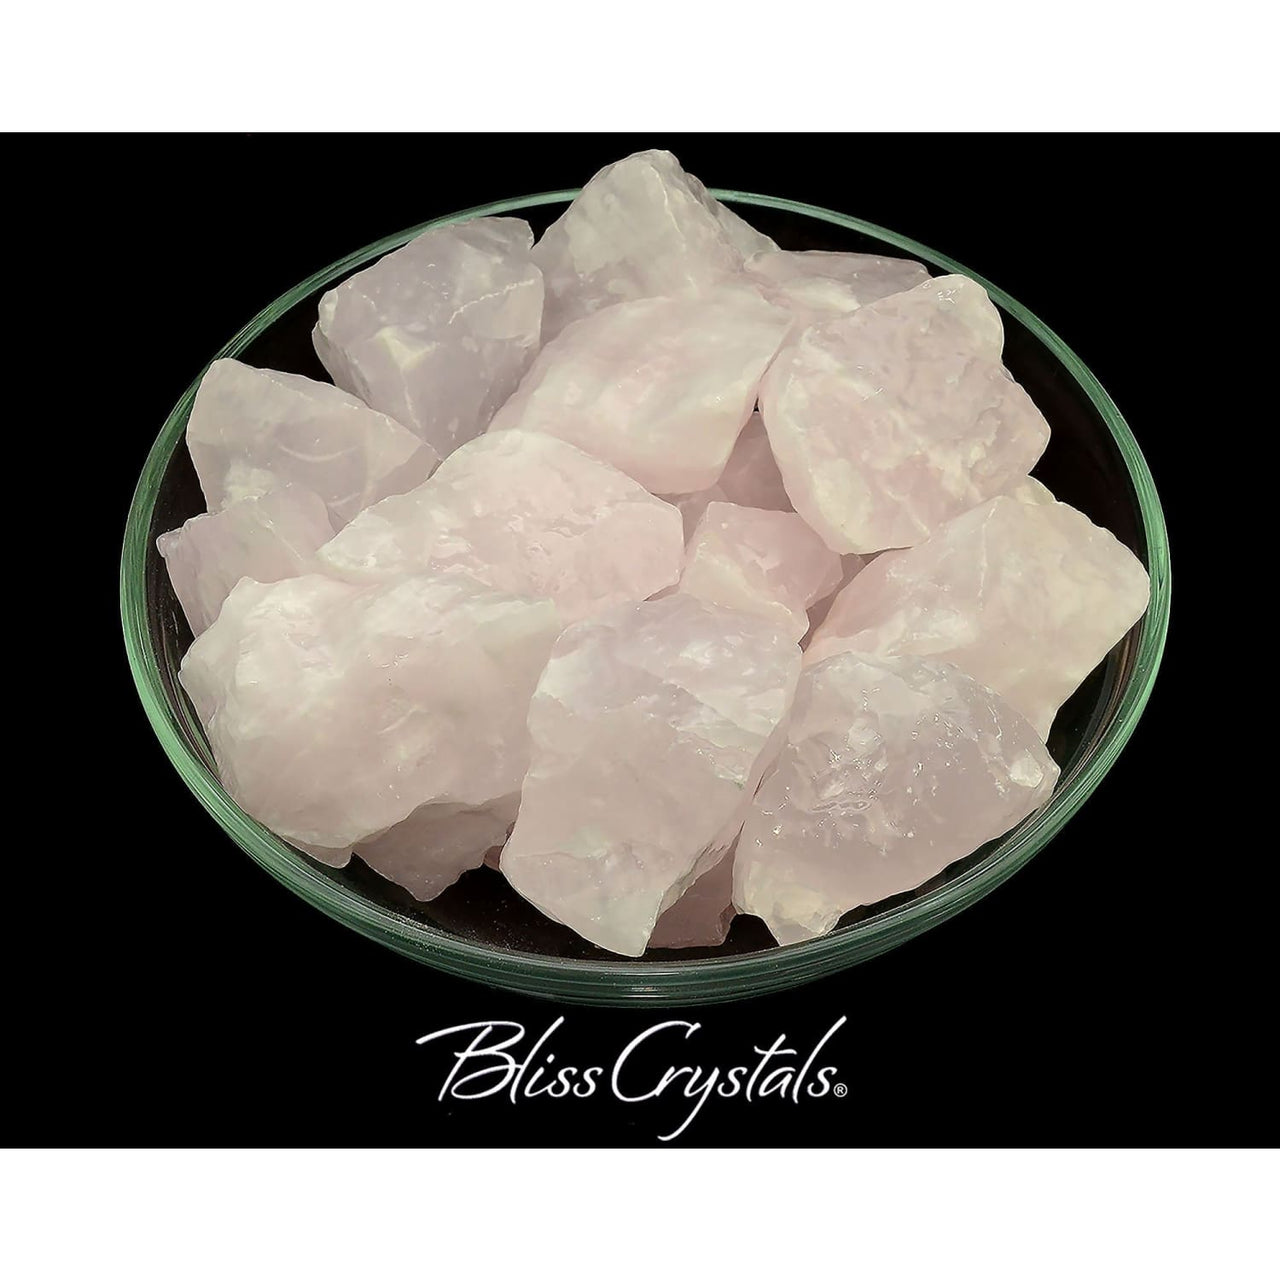 1 PINK CALCITE Rough Stone Crystal Mineral #PC59